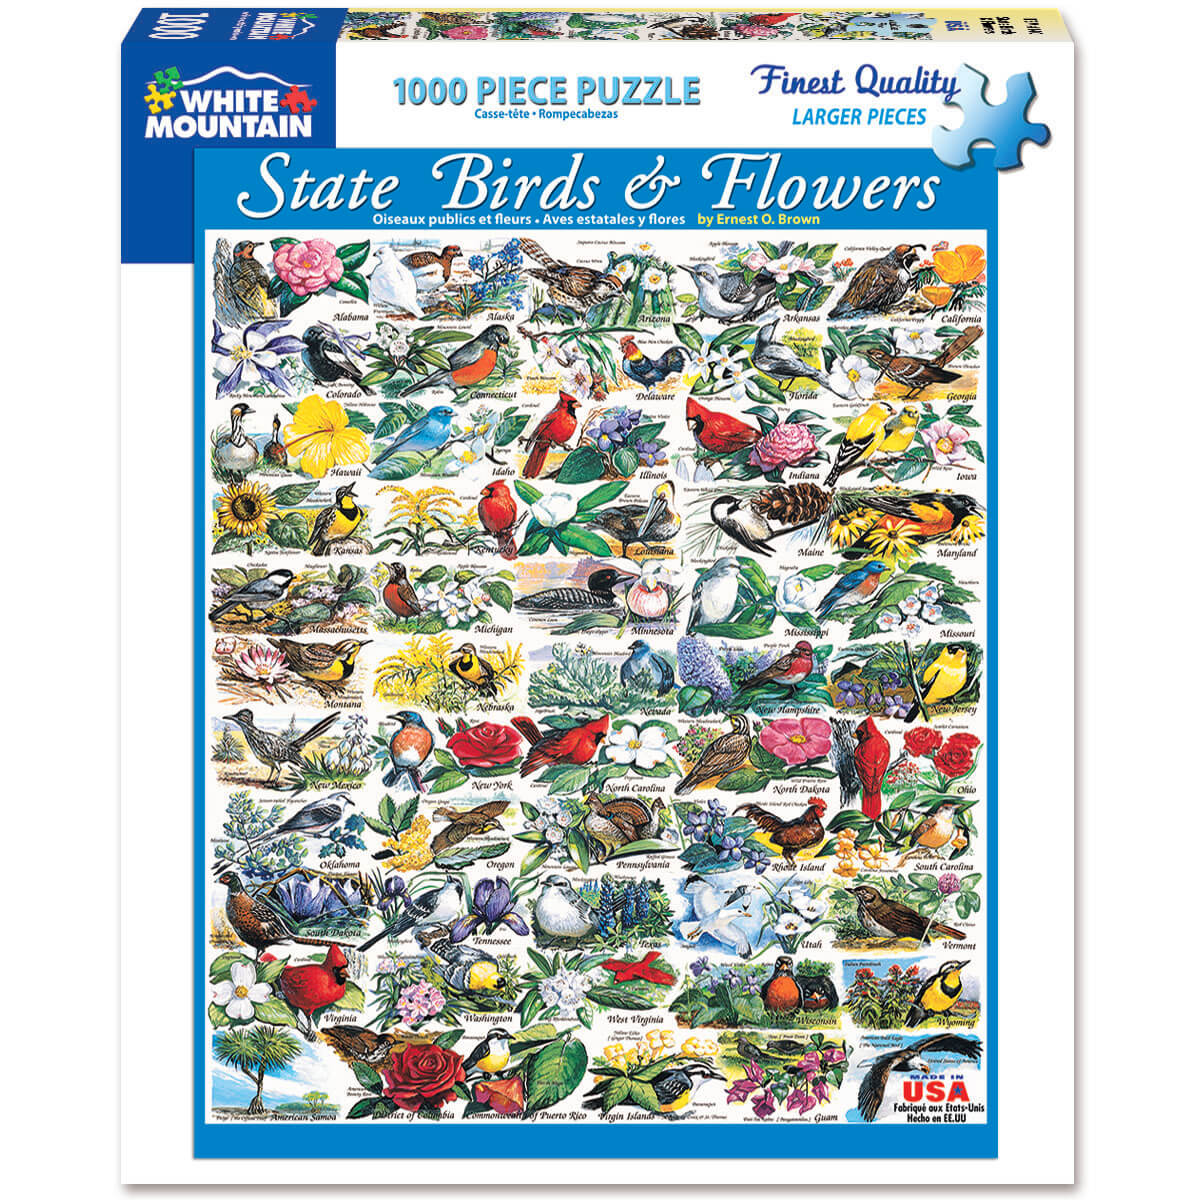 White Mountain Puzzles State Birds & Flowers 1000 Piece Jigsaw Puzzle